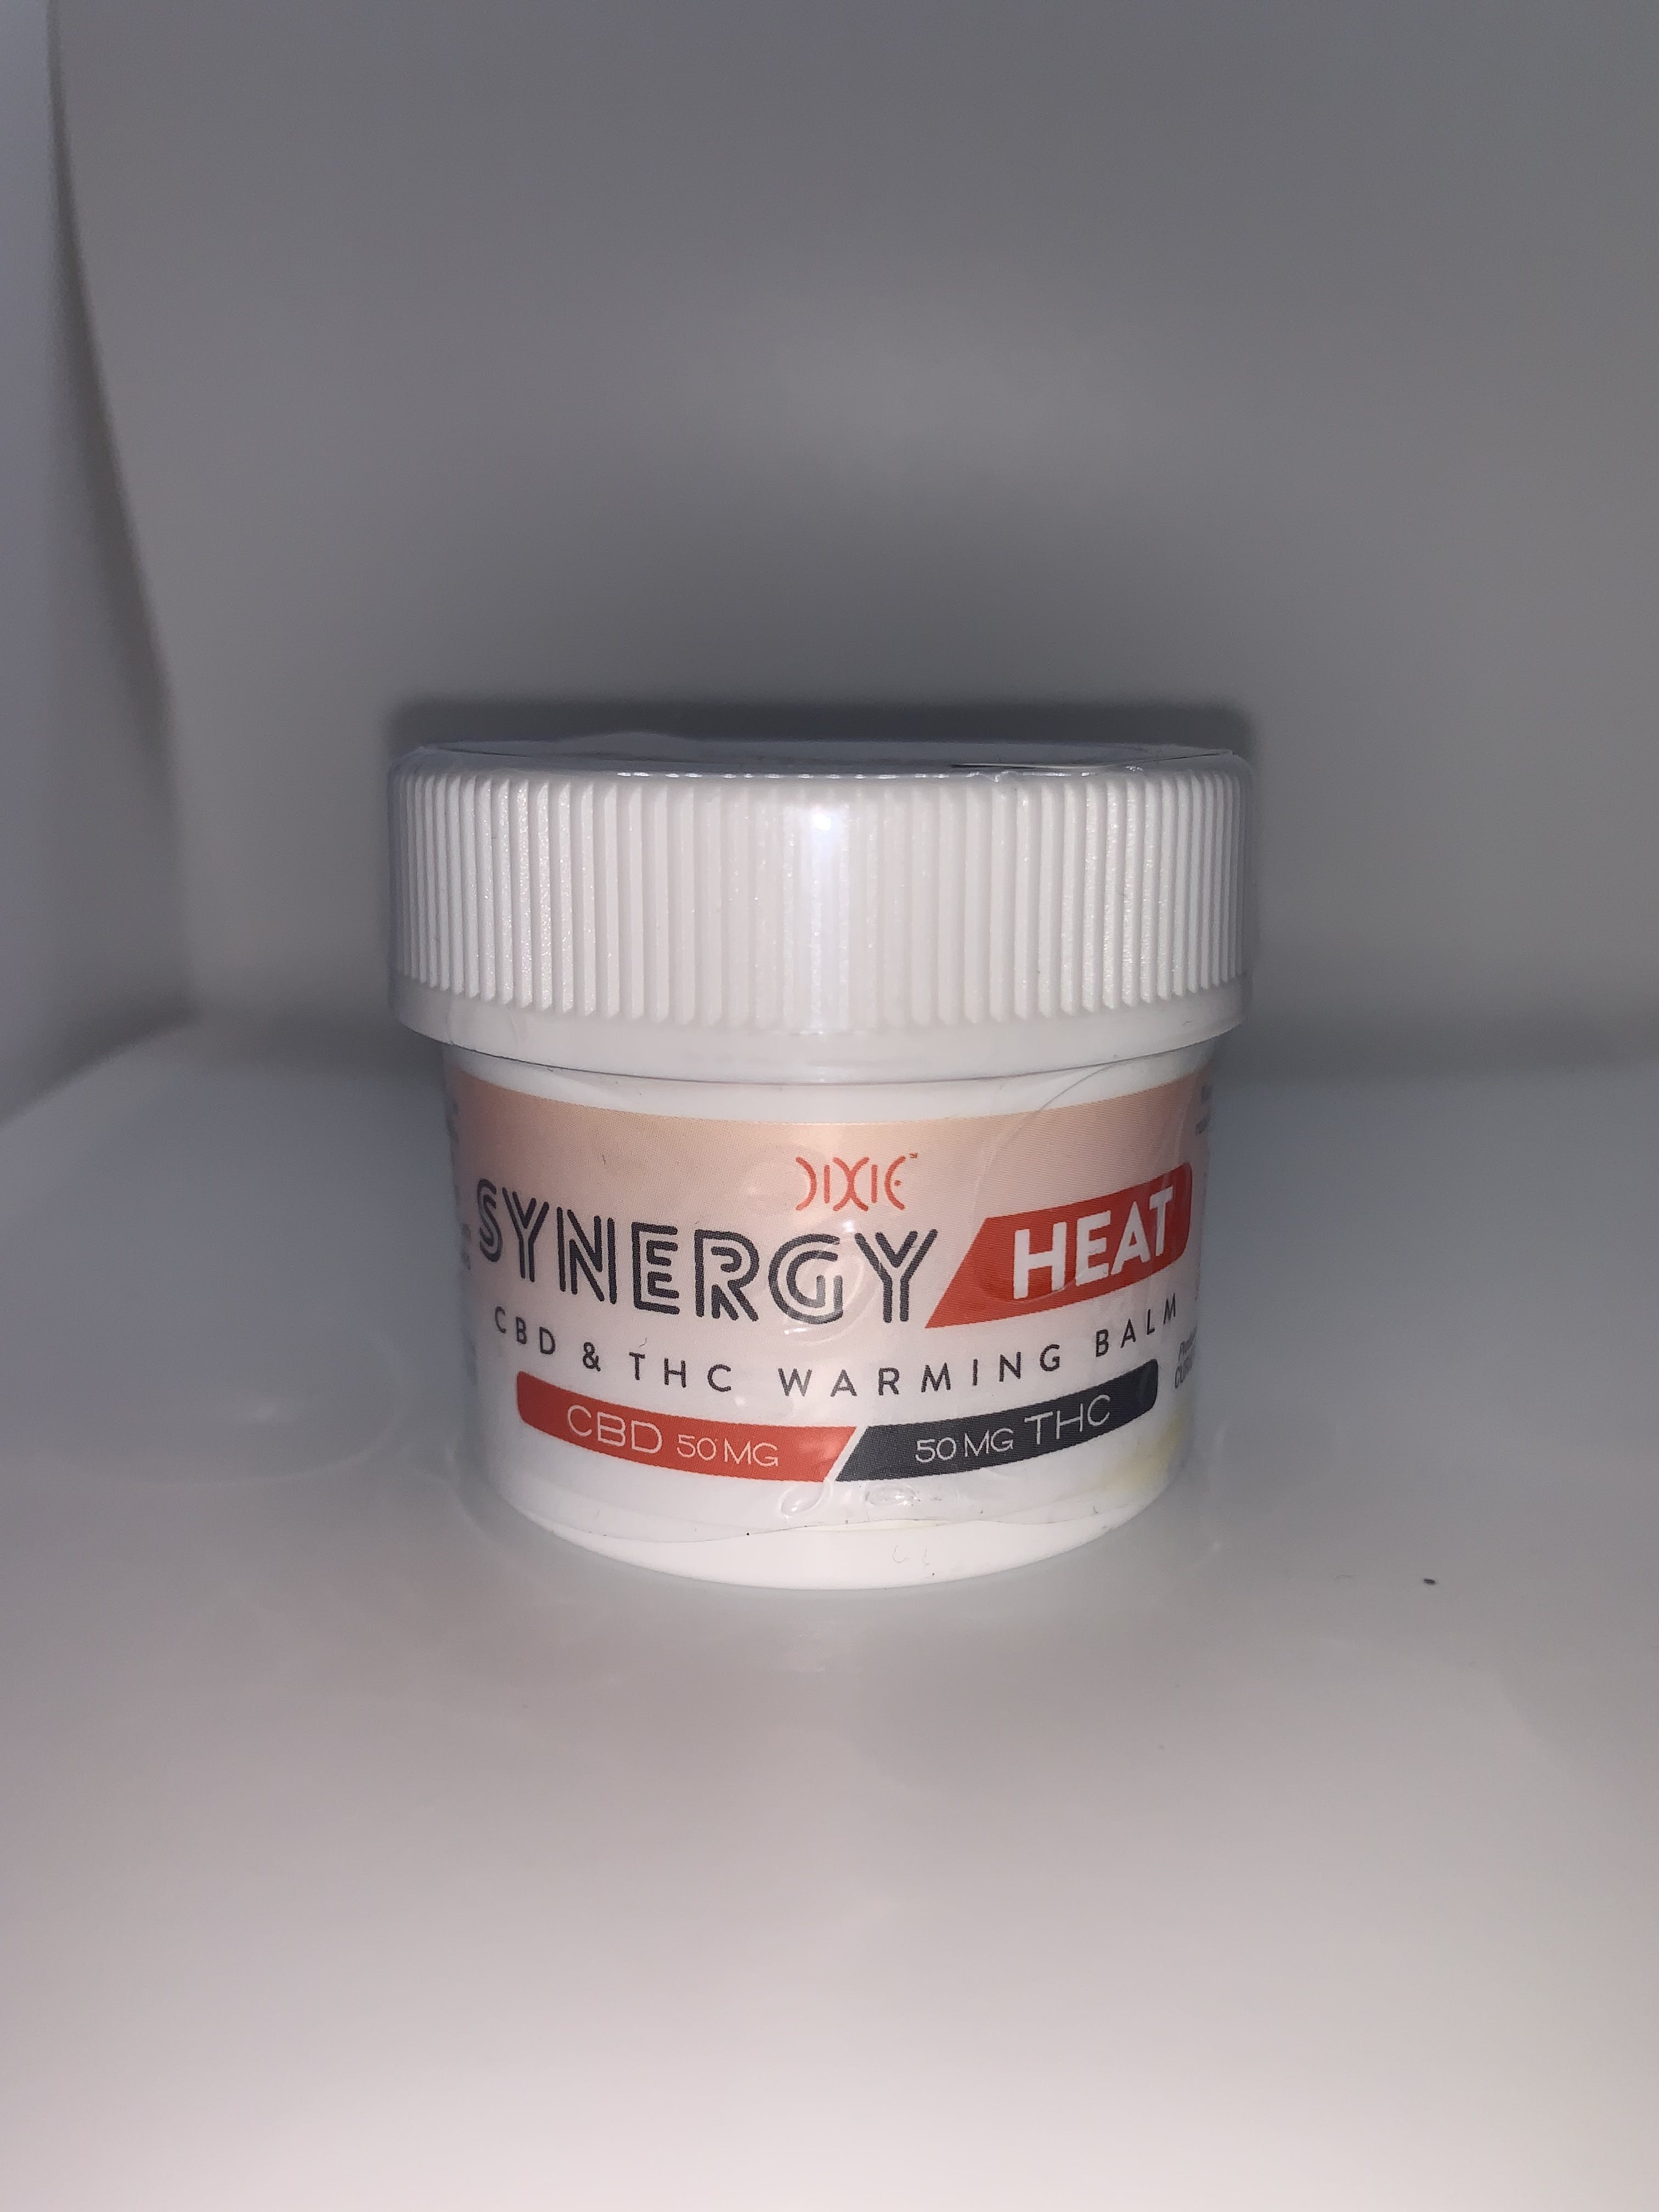 topicals-dixie-synergy-heat-warming-relief-balm